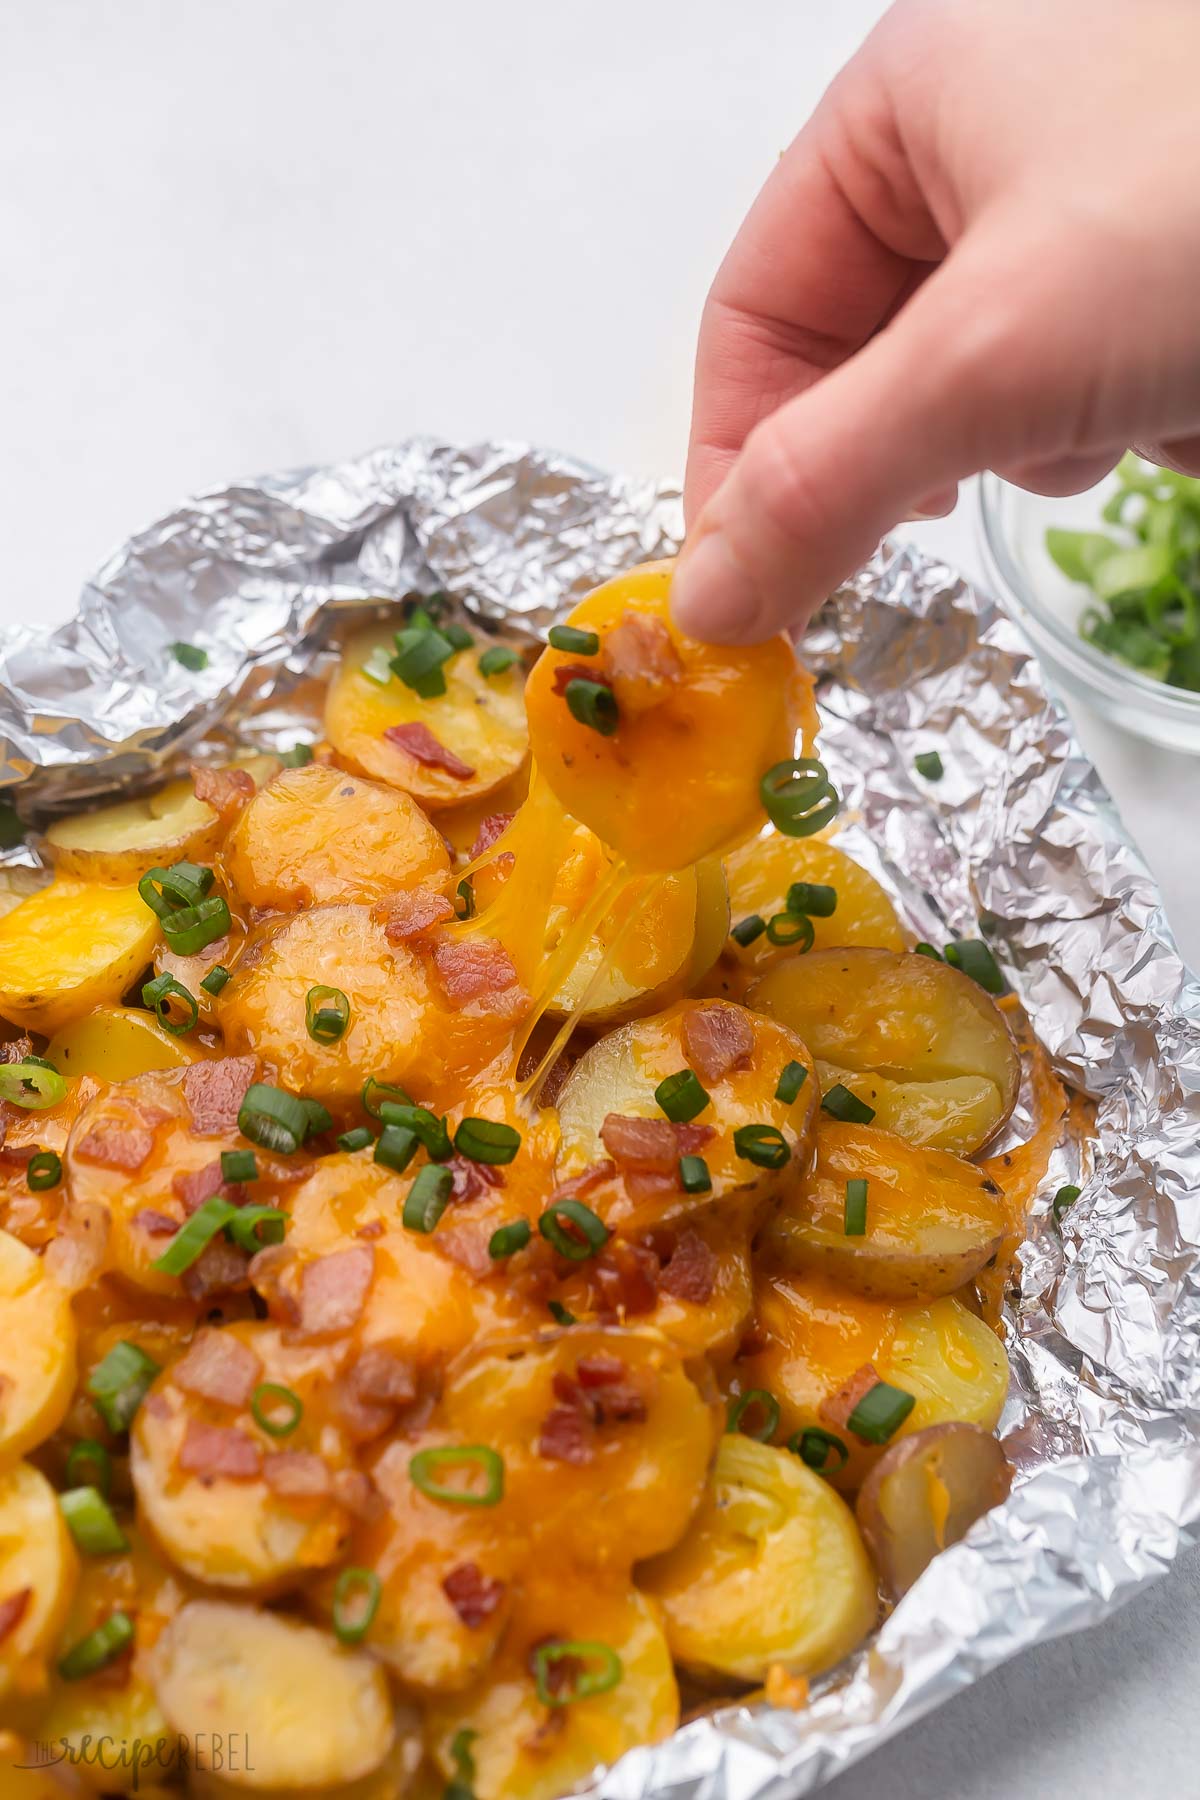 hand pulling a cheesy grilled potato out of foil pack.